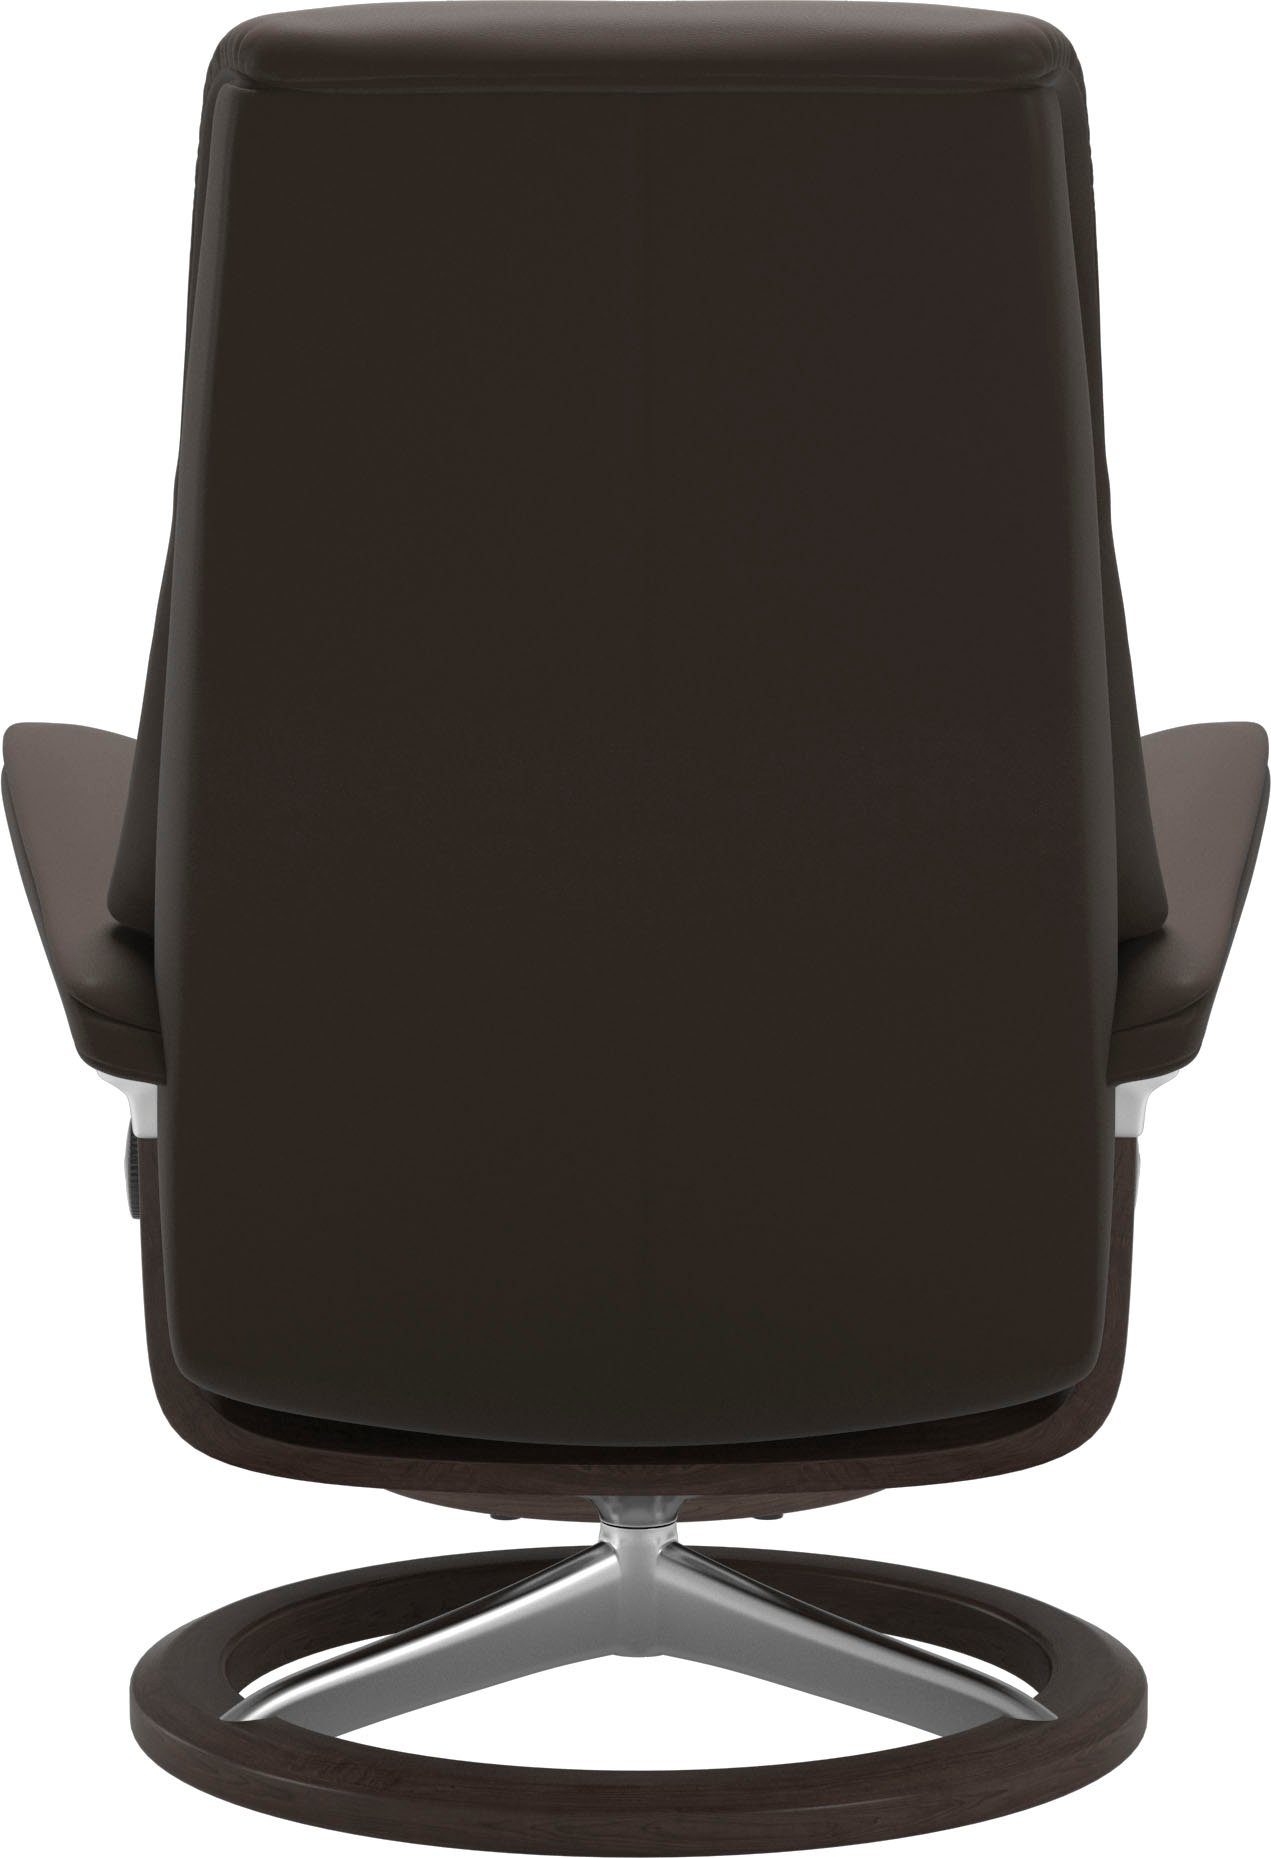 Signature Größe L,Gestell mit Base, Relaxsessel Wenge Stressless® View,